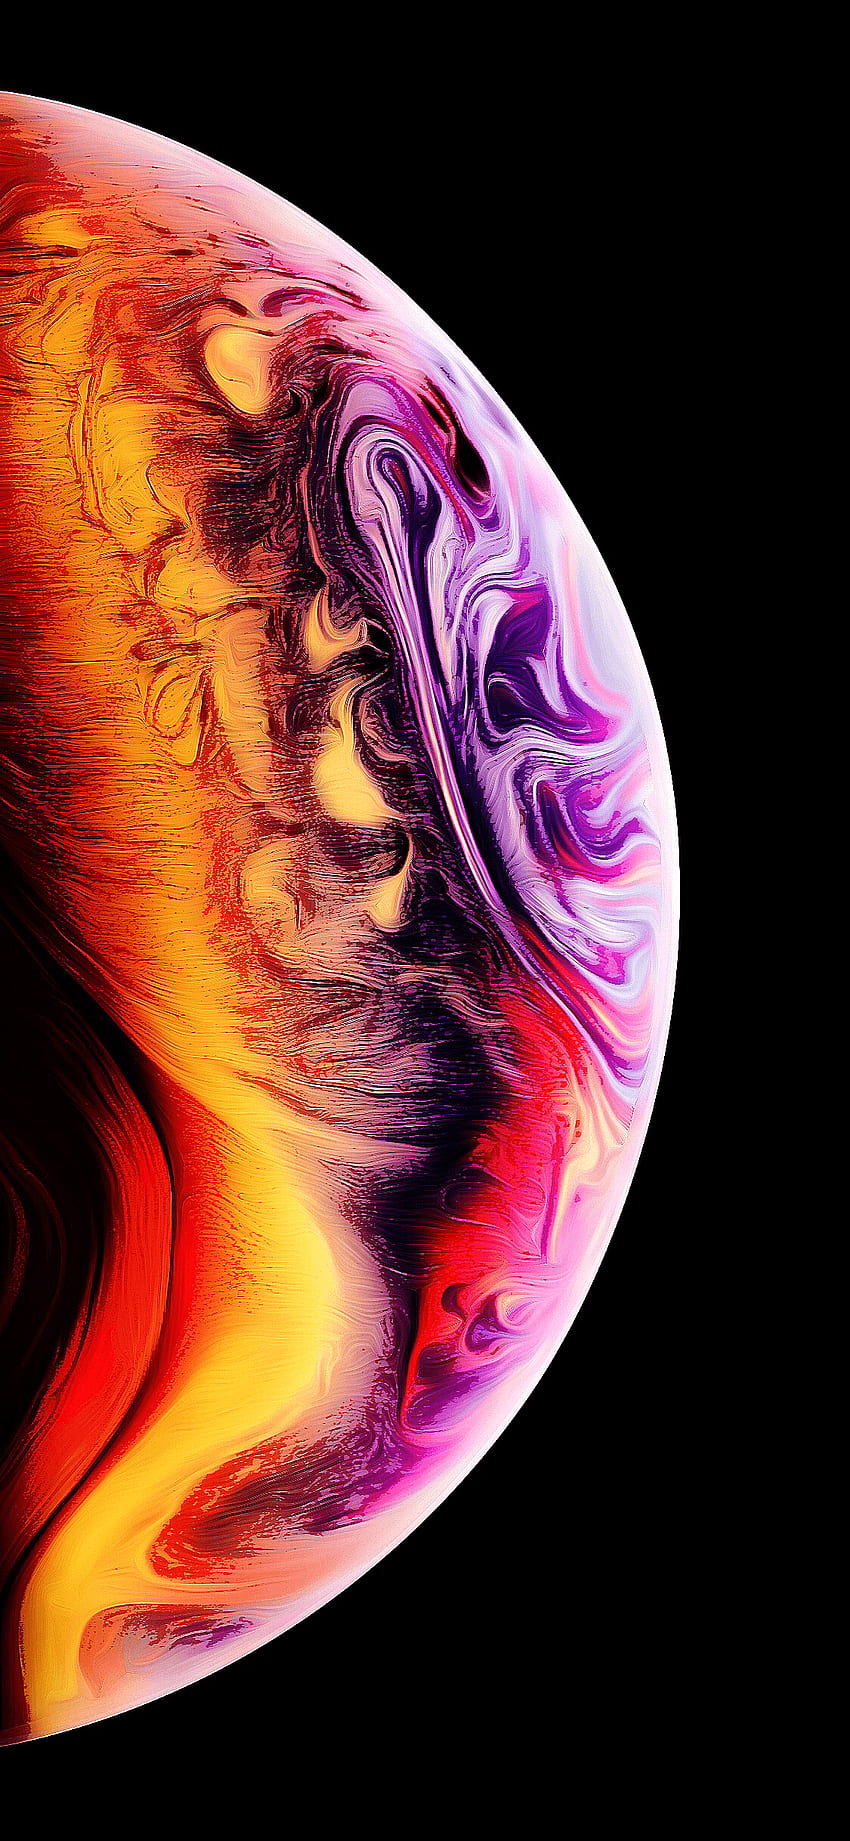 The All New IPhone XS Here UltraLinx, 8D HD phone wallpaper